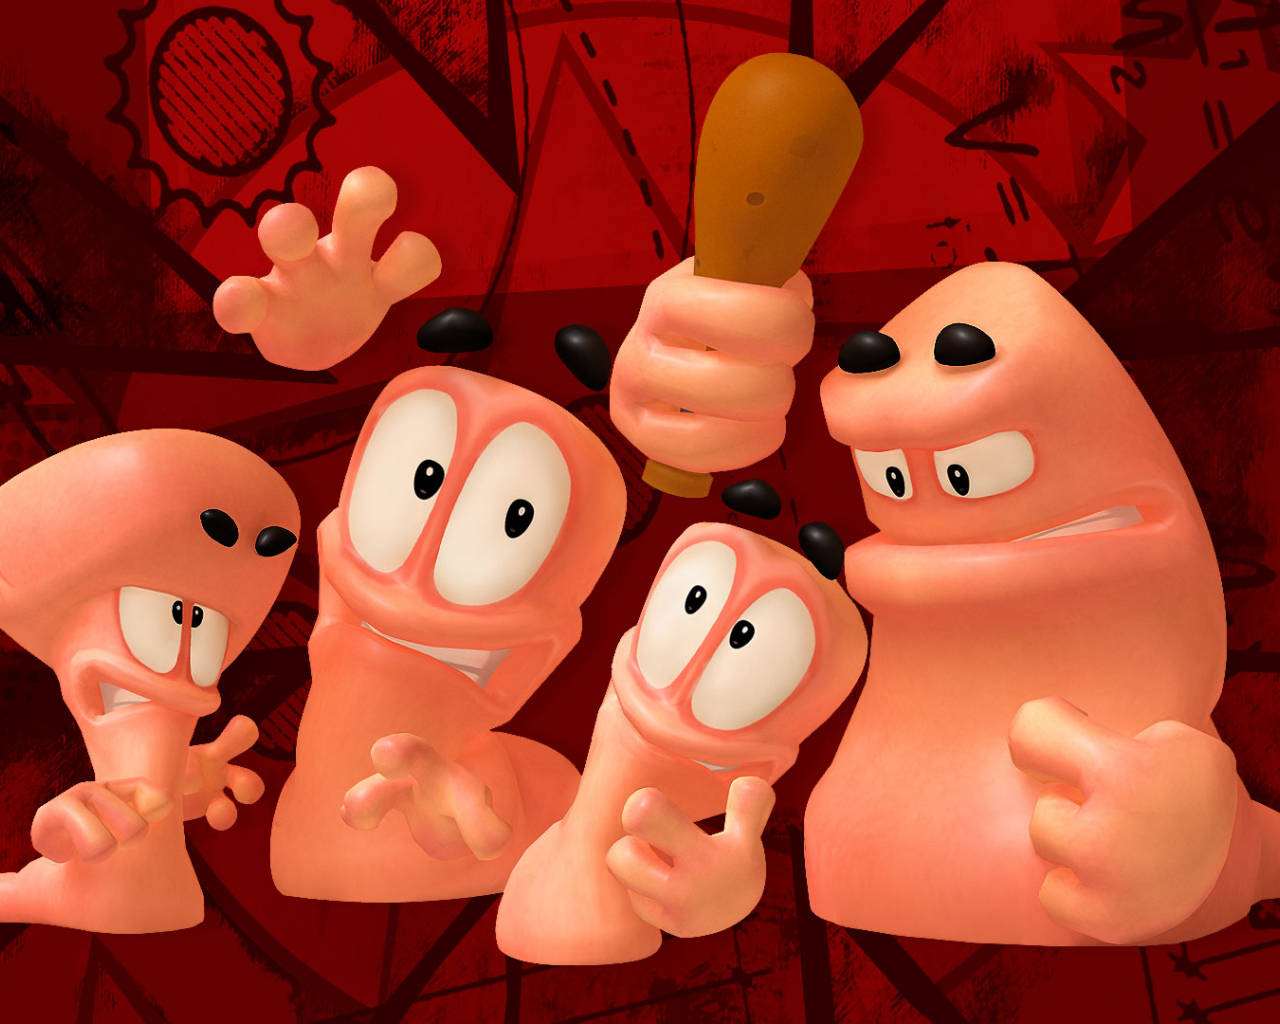 The Heavy Worm In Worms: Revolution Wallpaper